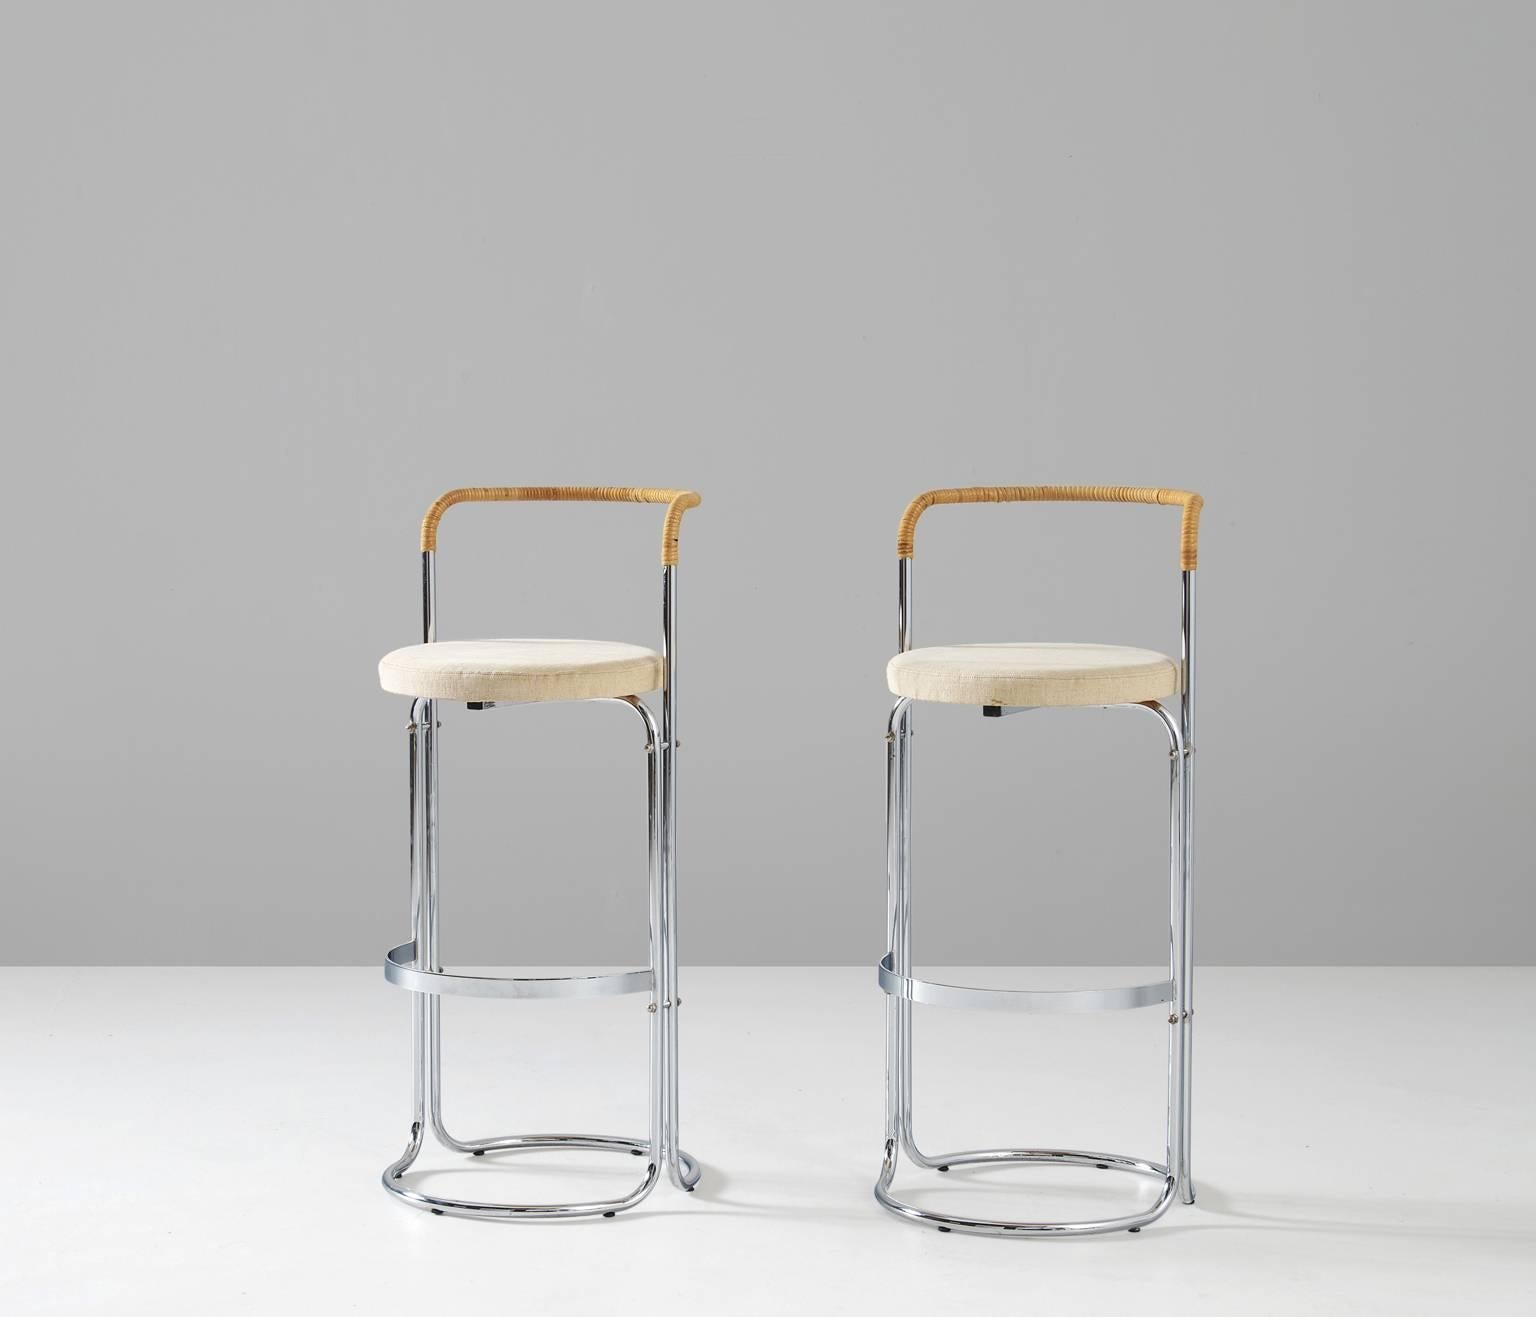 A pair of bar stools, in steel, rattan and fabric, designed by Poul Nørreklit for Georg Petersens, Denmark, 1970s. 

Bar stools with a chromed tubular steel frame. Round seating upholstered with beige fabric. De semi-circled back is wrapped in